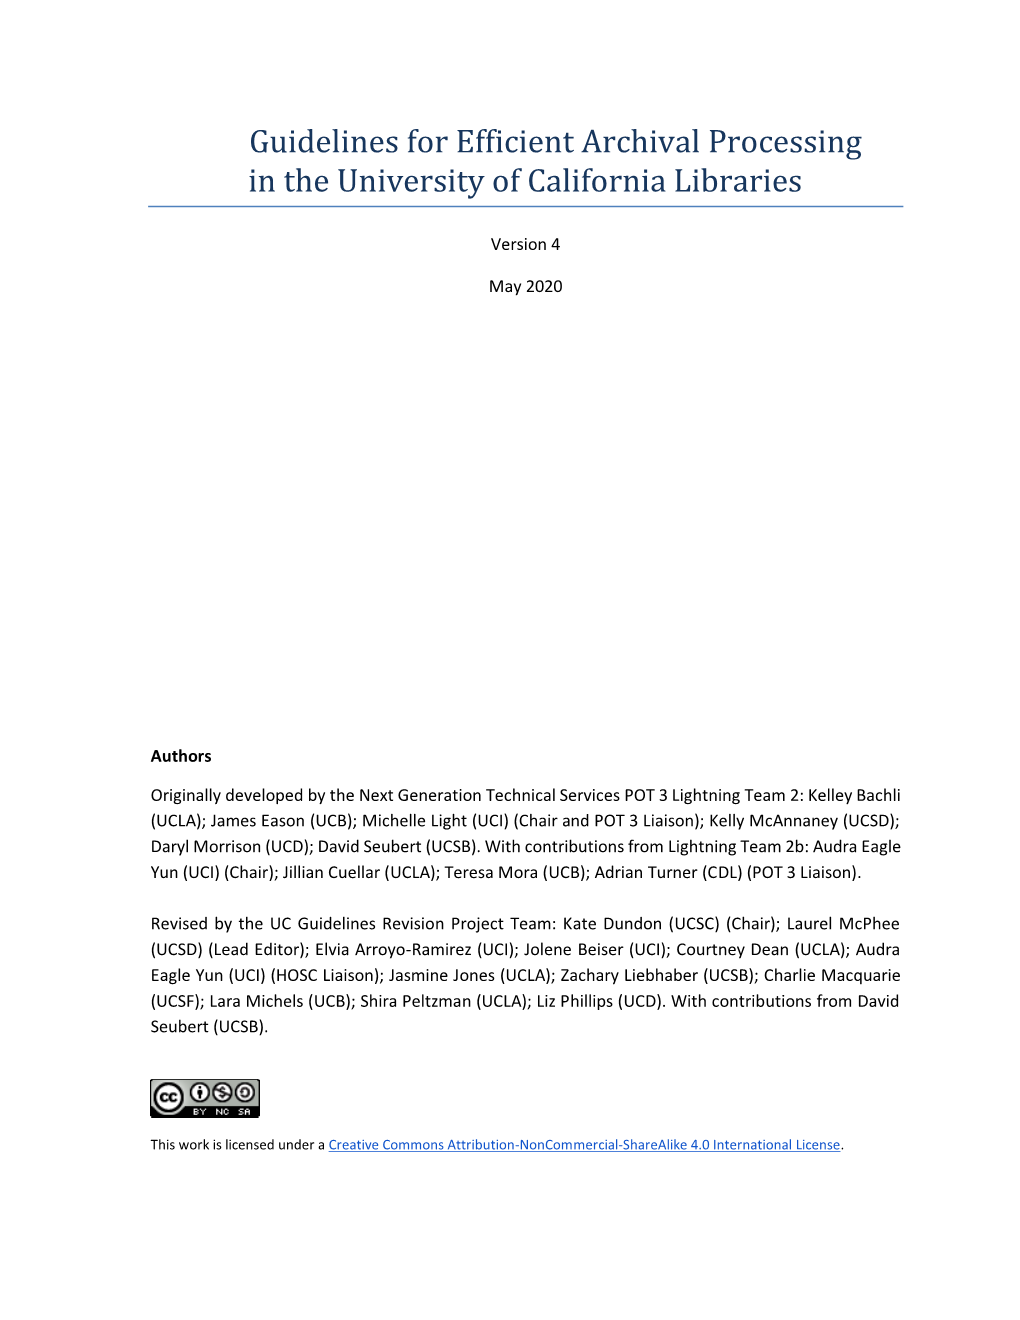 Guidelines for Efficient Archival Processing in the University of California Libraries